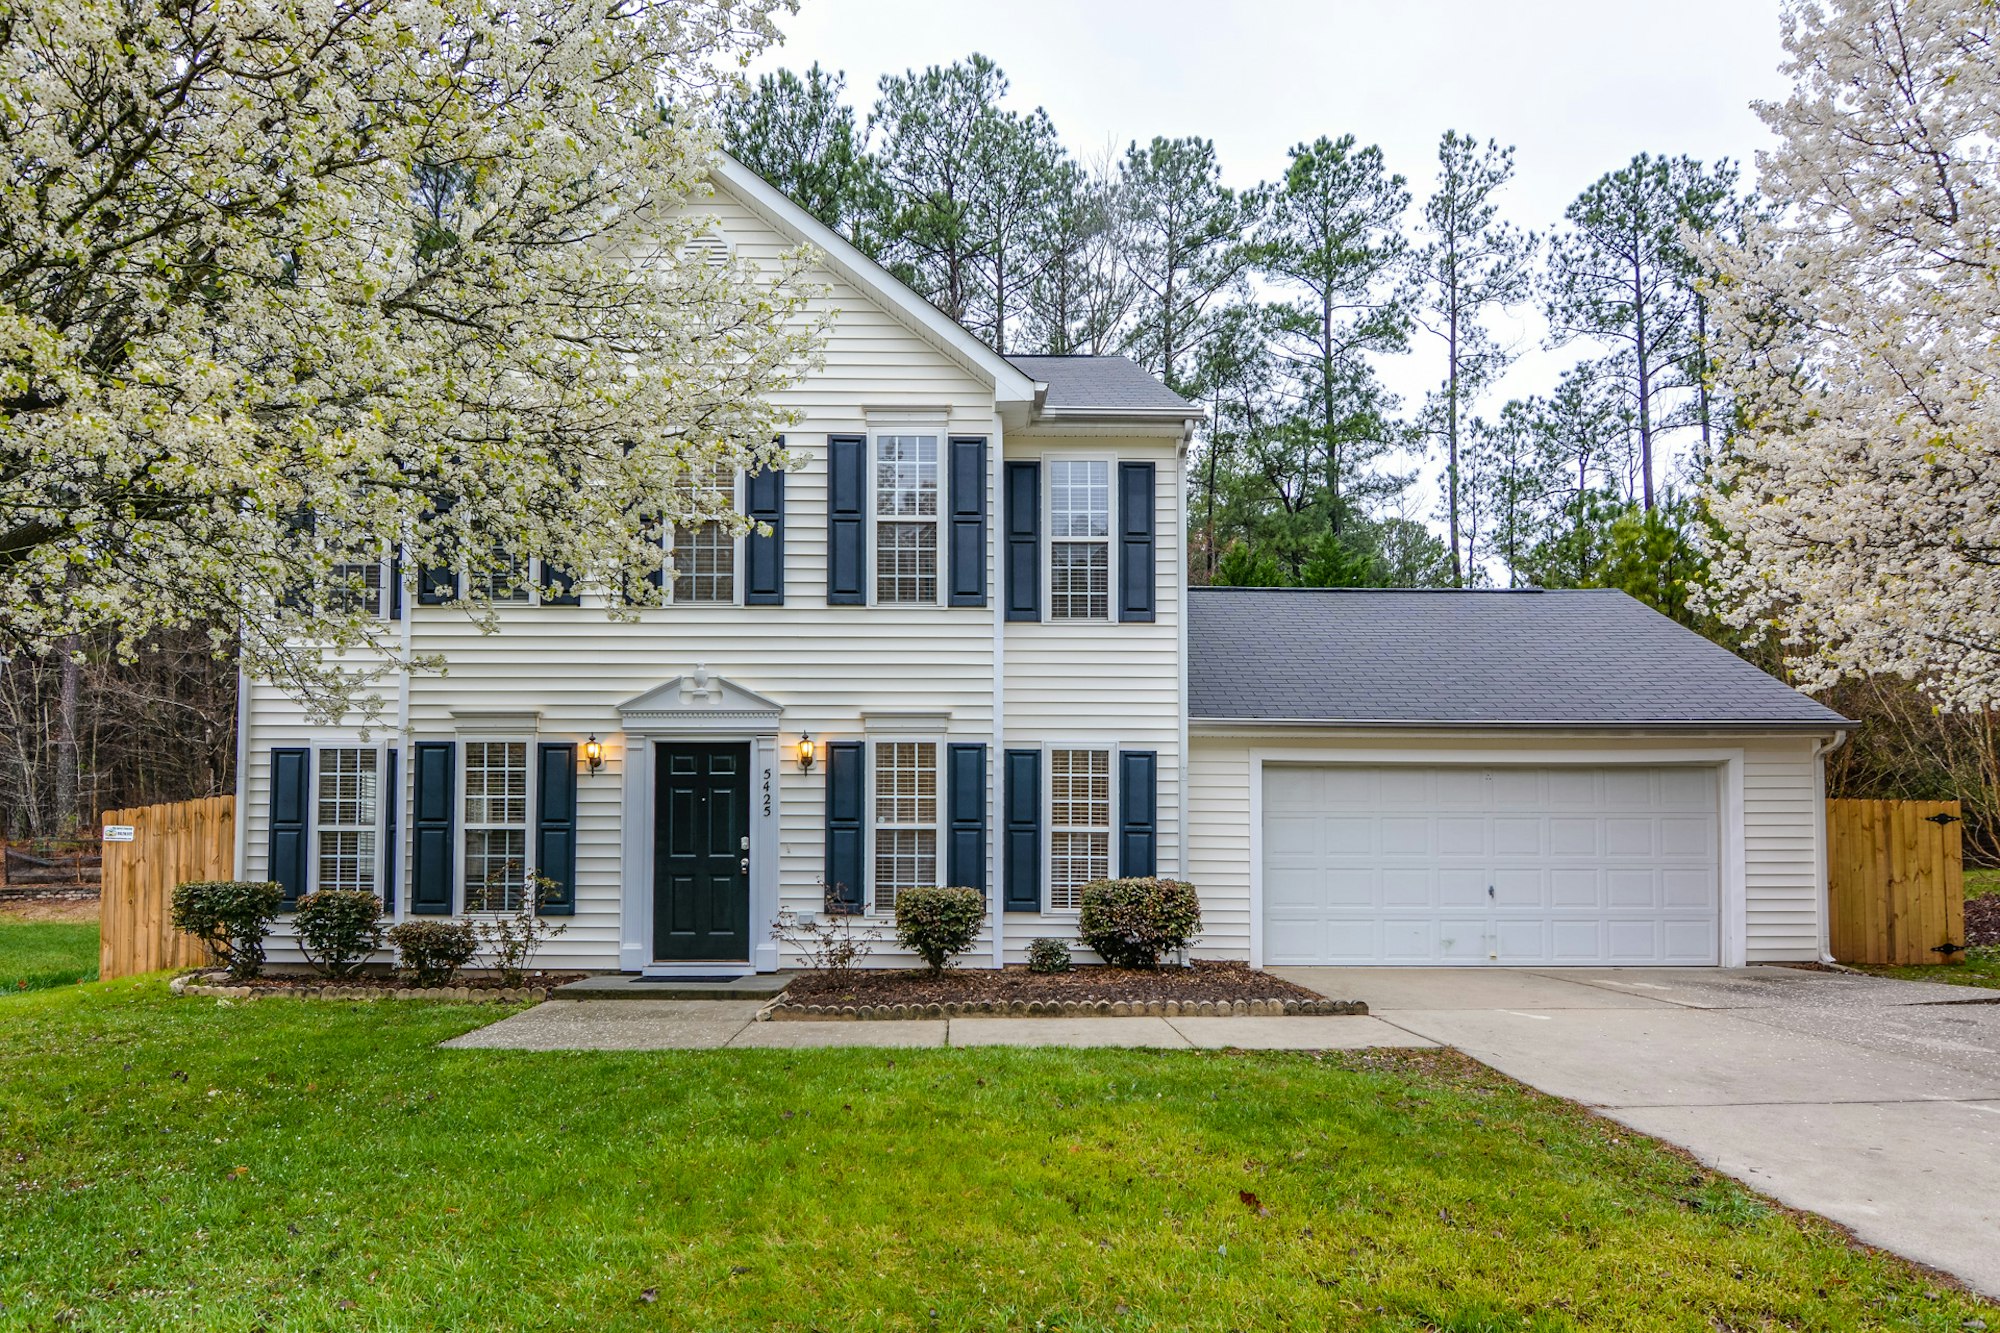 Photo 1 of 24 - 5425 Pageford Dr, Durham, NC 27703